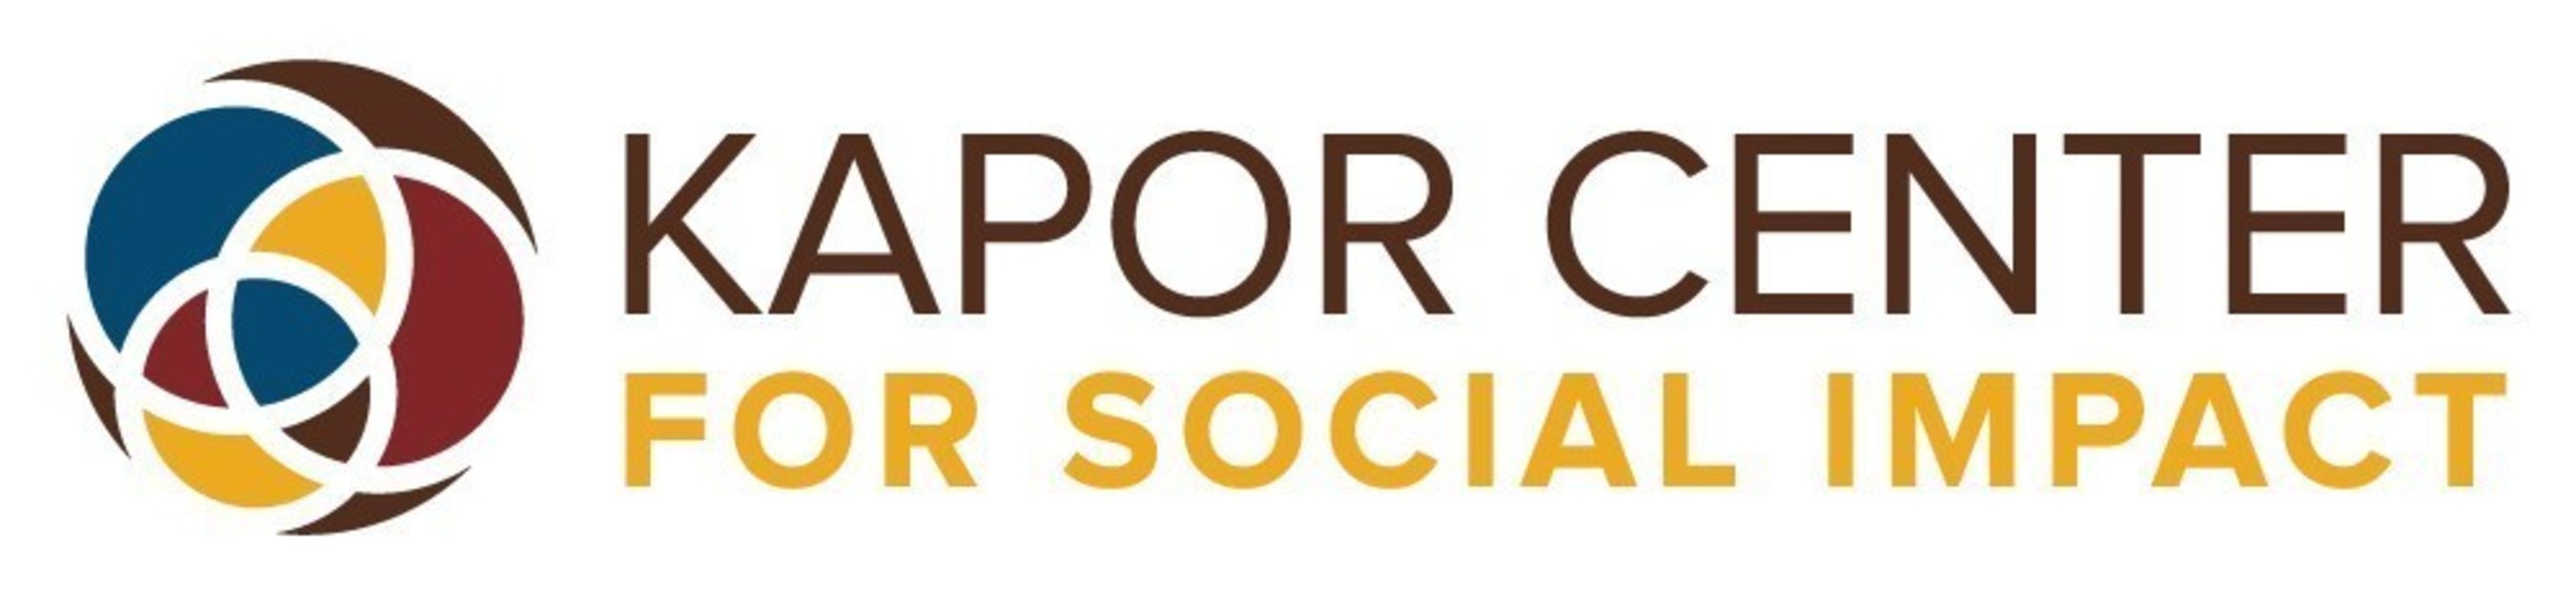 The Kapor Center for Social Impact works to make the technology ecosystem and entrepreneurship more diverse and inclusive.